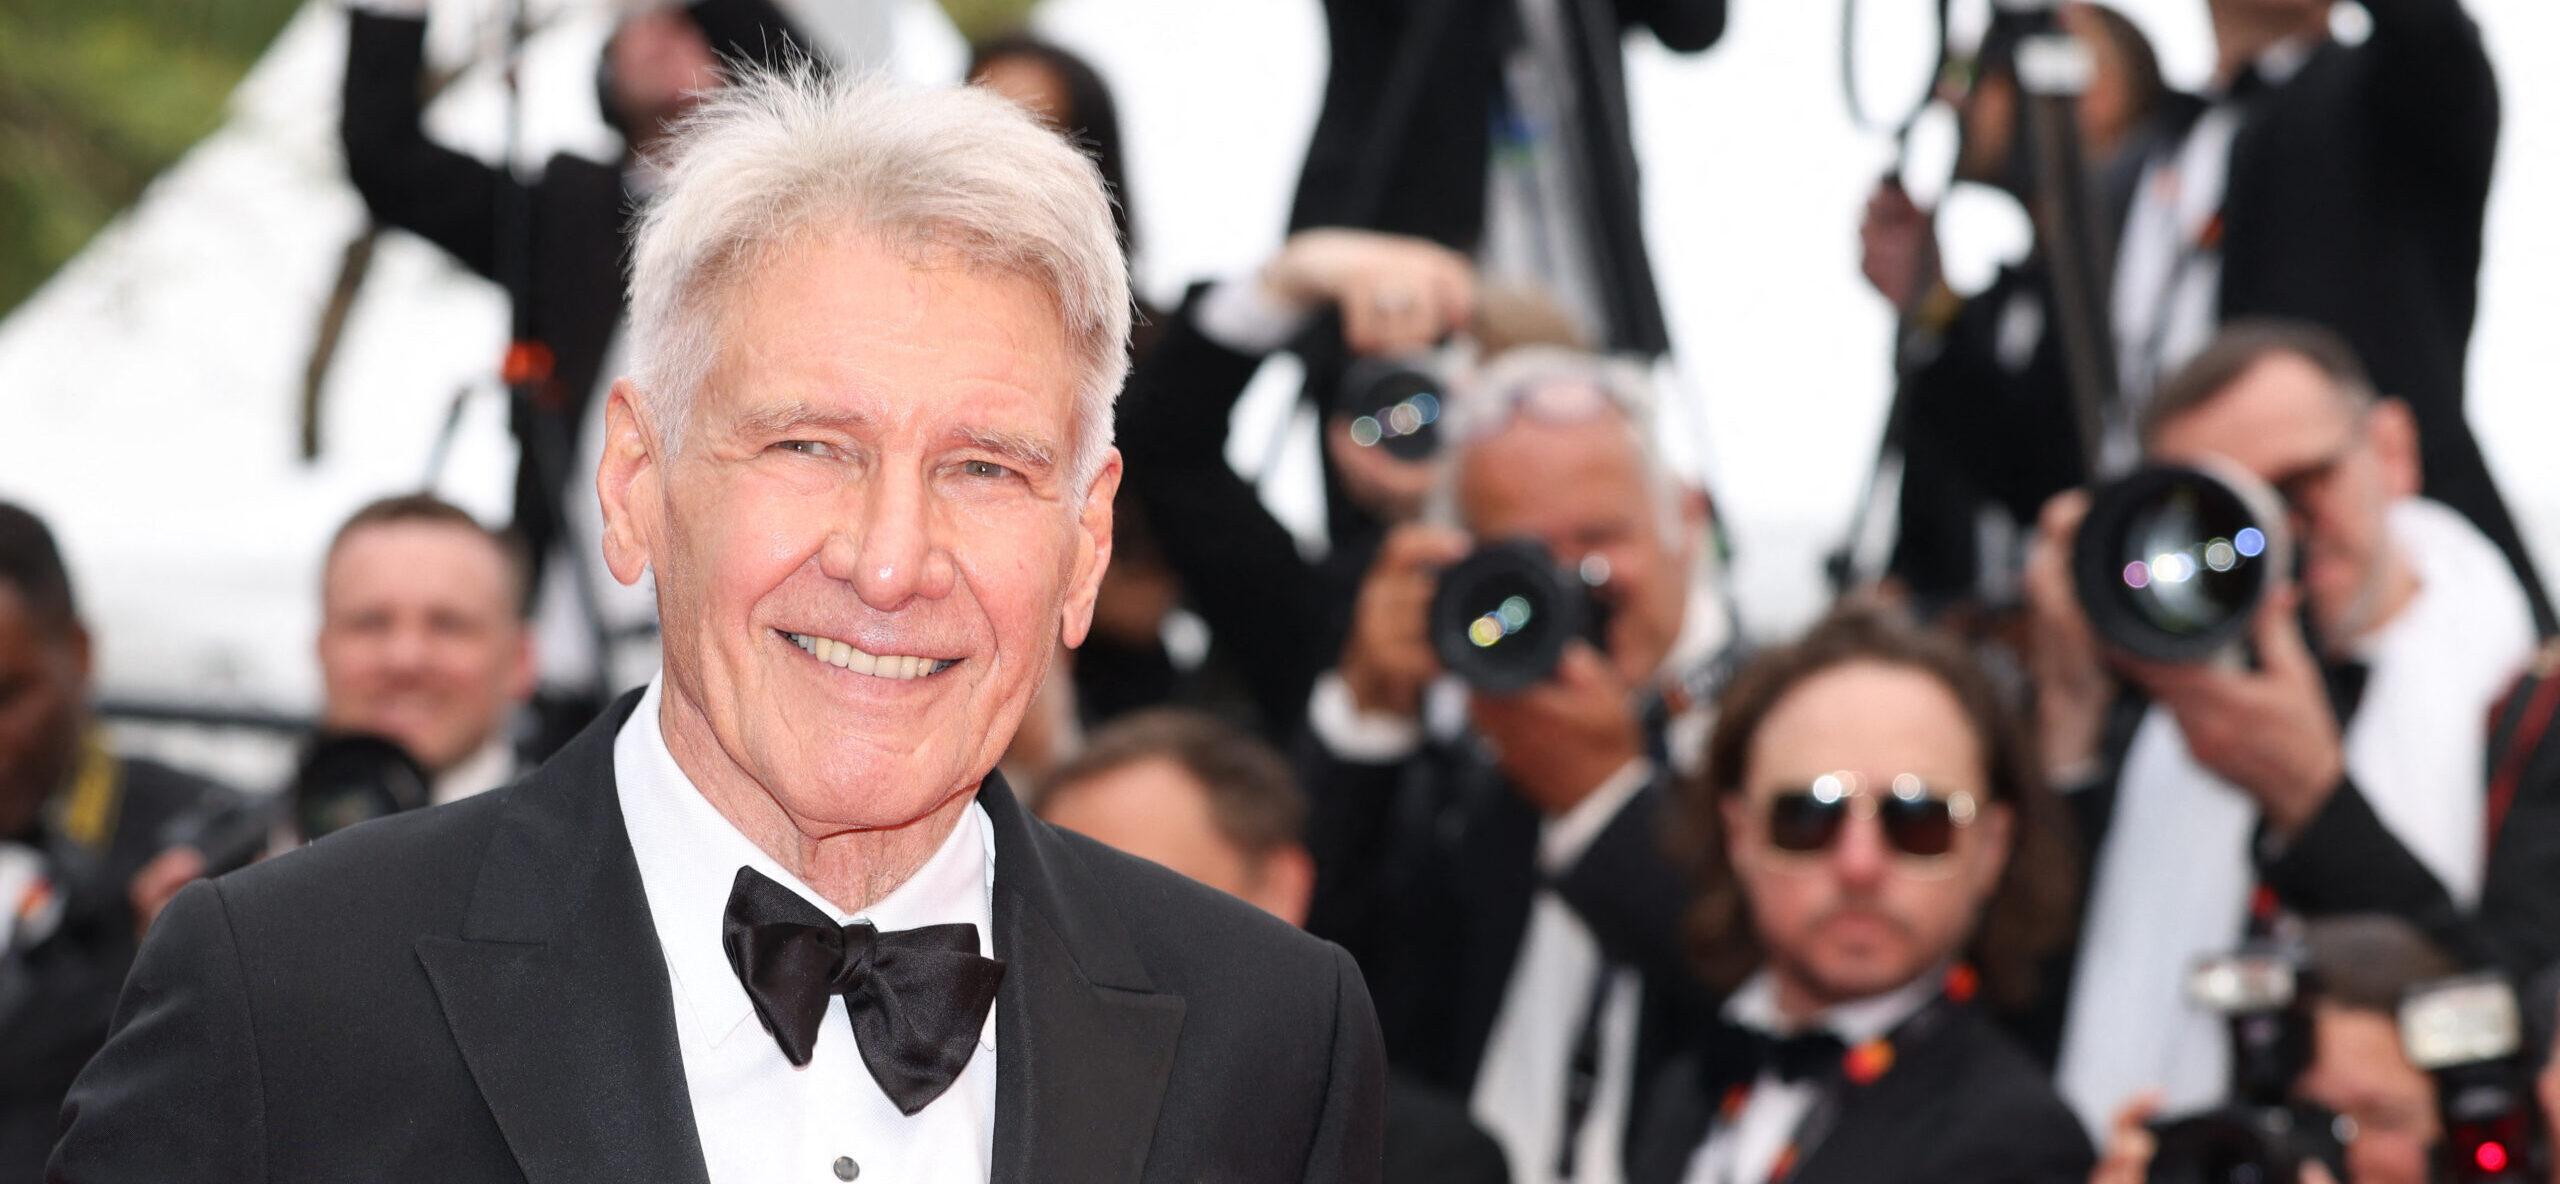 Harrison Ford Describes The ‘Legacy’ Of ‘Indiana Jones’ As ‘Magic’